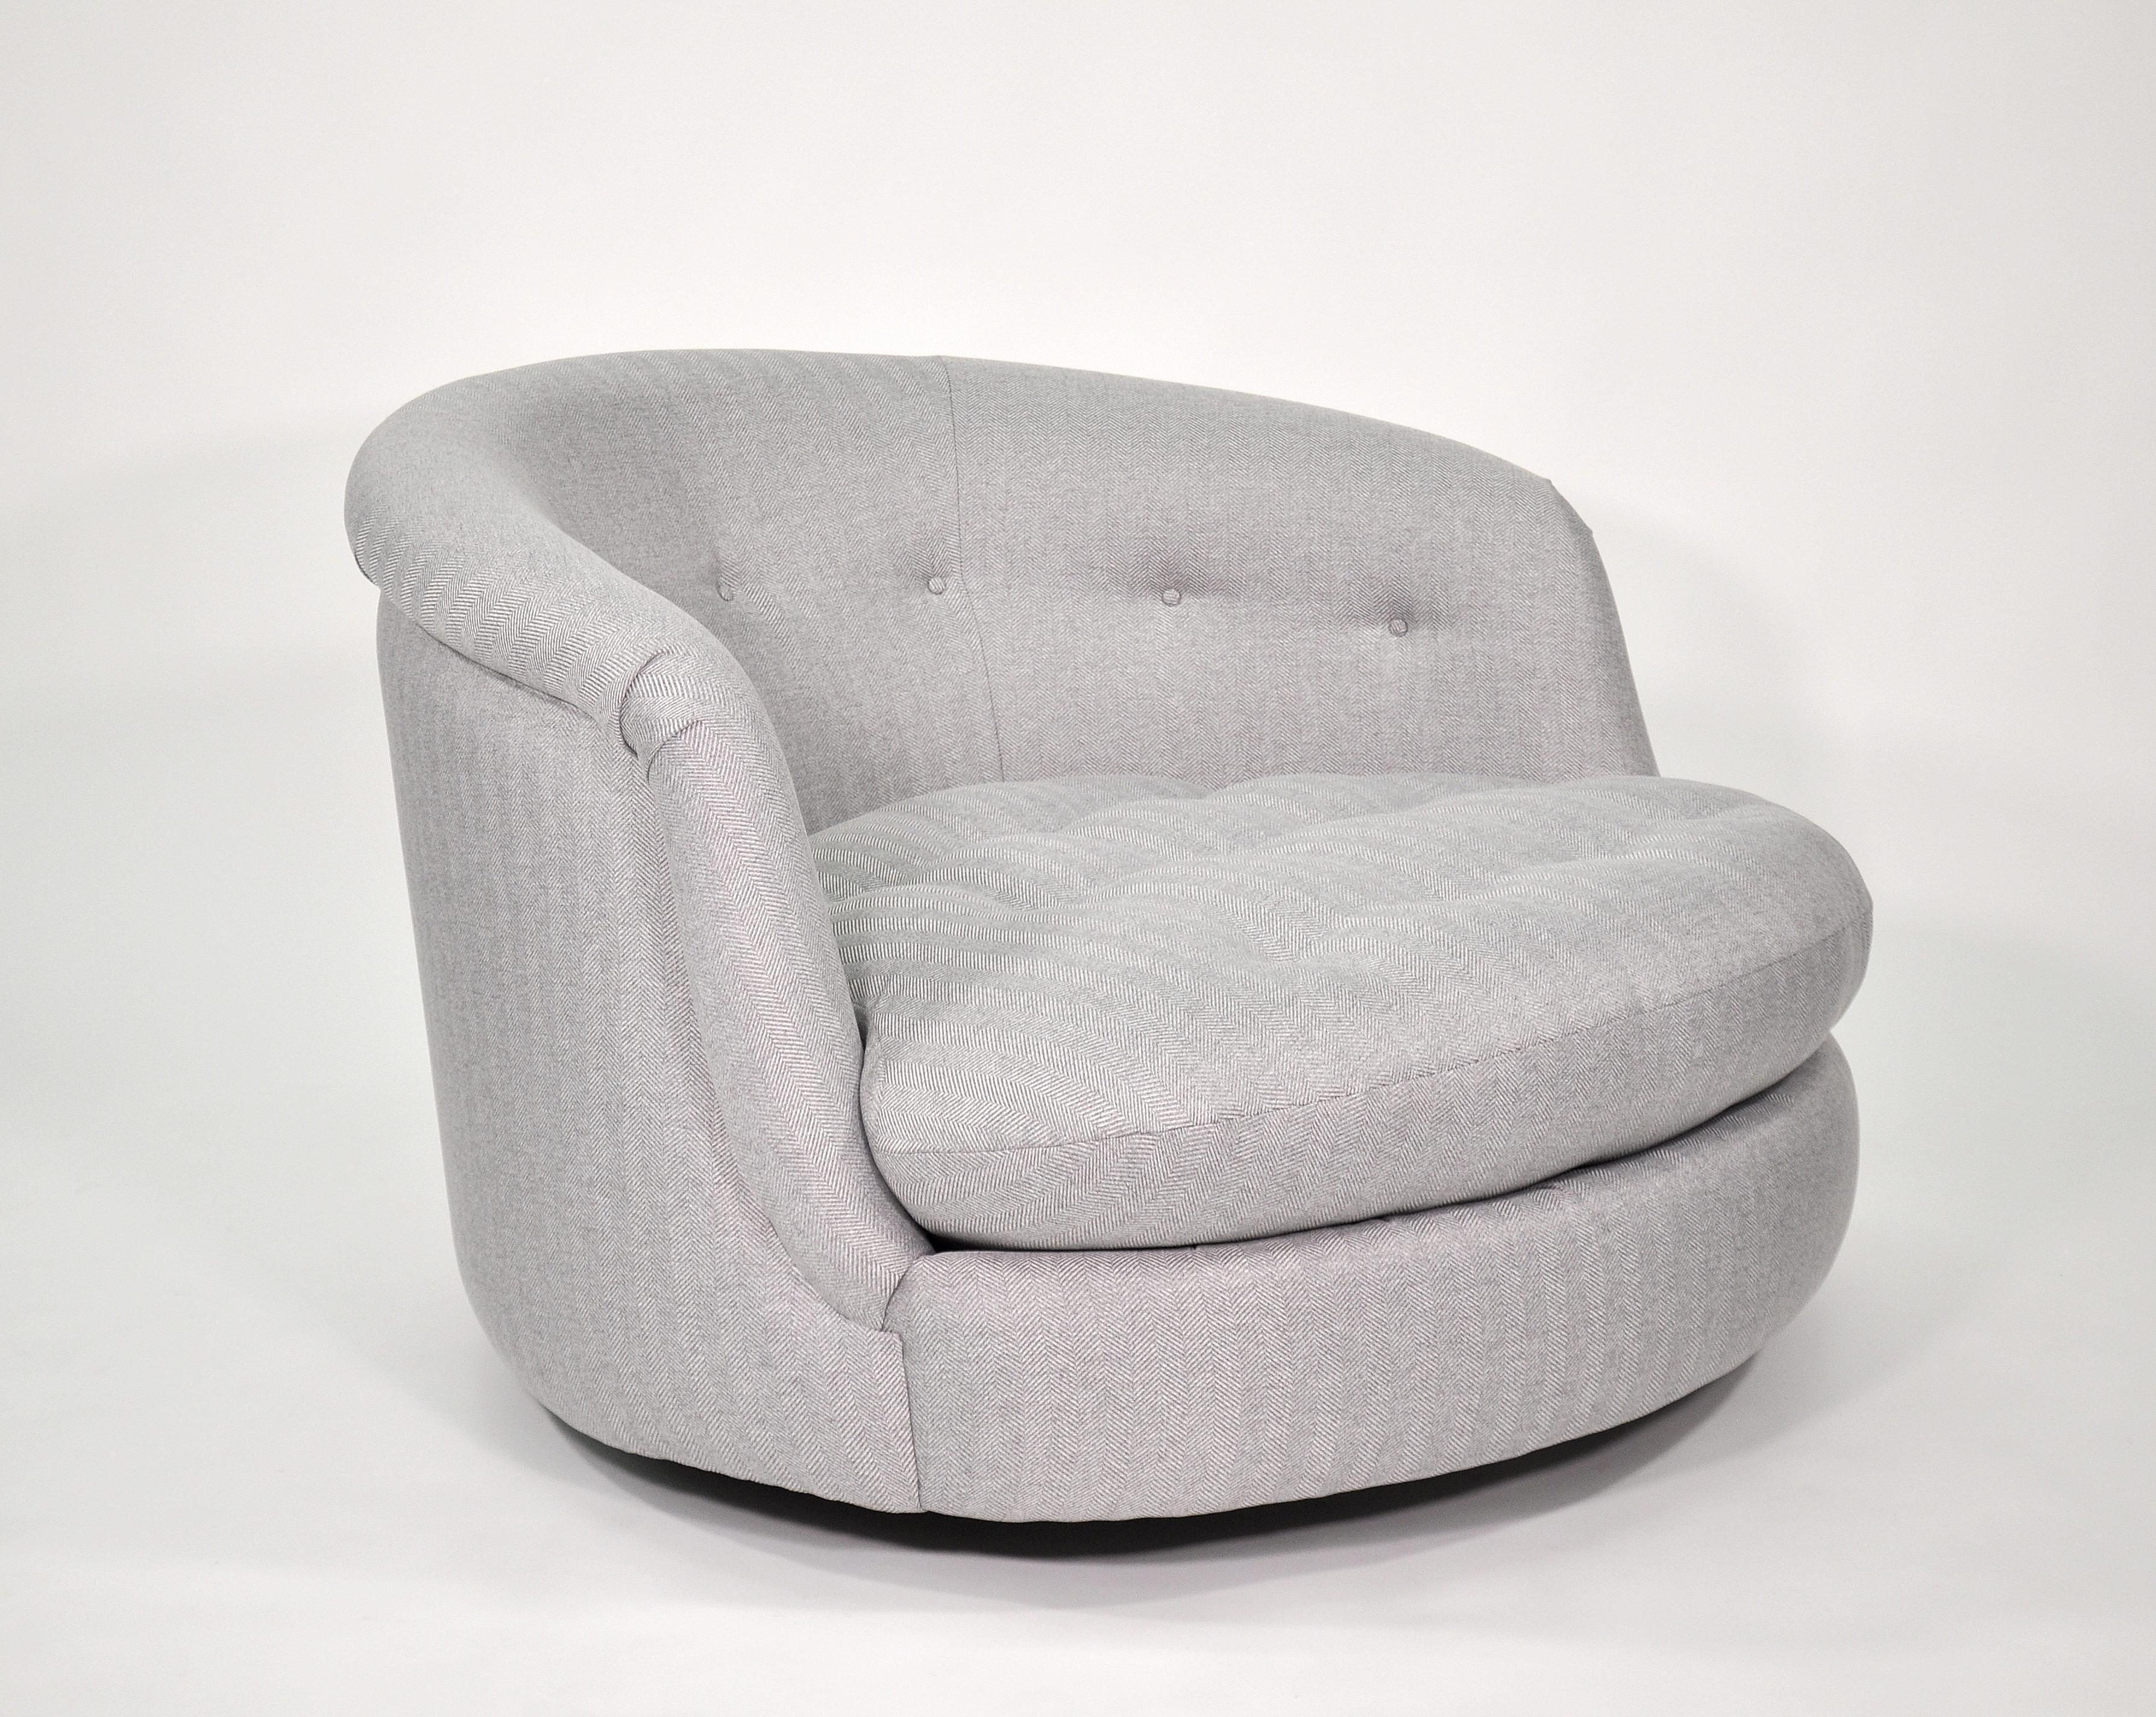 A fabulous Mid-Century Modern oversized barrel back gray tufted club chair, model 3405, designed by Milo Baughman for Thayer Coggin in 1965, and named the 